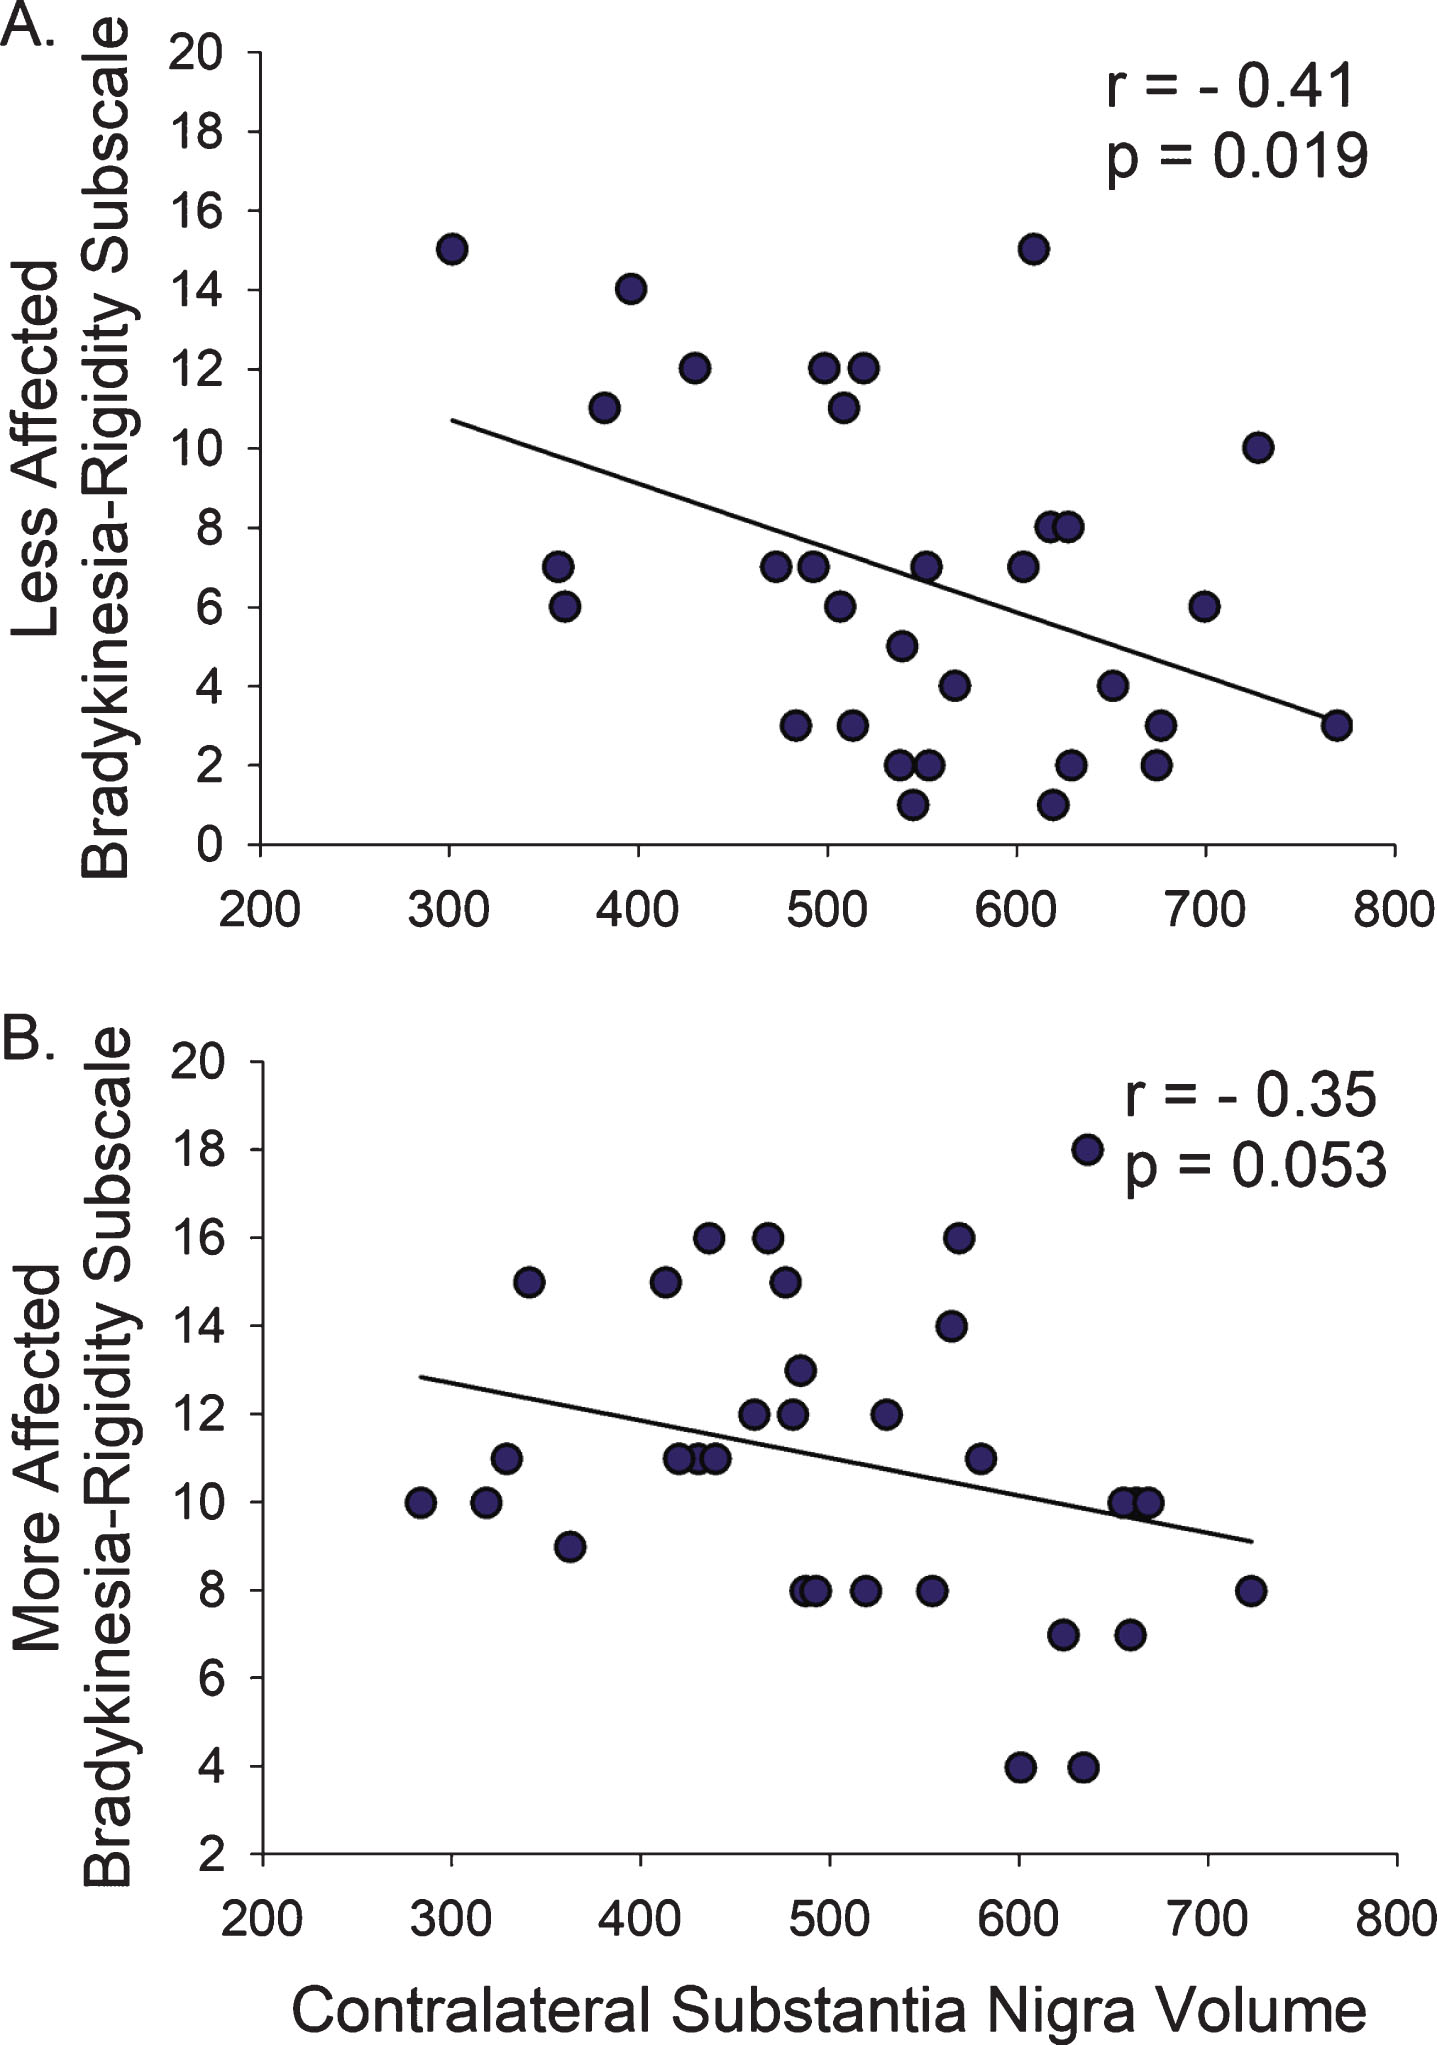 Bradykinesia and Rigidity on the Less- and More-Affected Sides. (A) The relationship between Bradykinesia-Rigidity Subscale and SN volume was more pronounced on the Less-Affected side compared to (B) the More-Affected side. r, Spearman’s rho correlation coefficient.